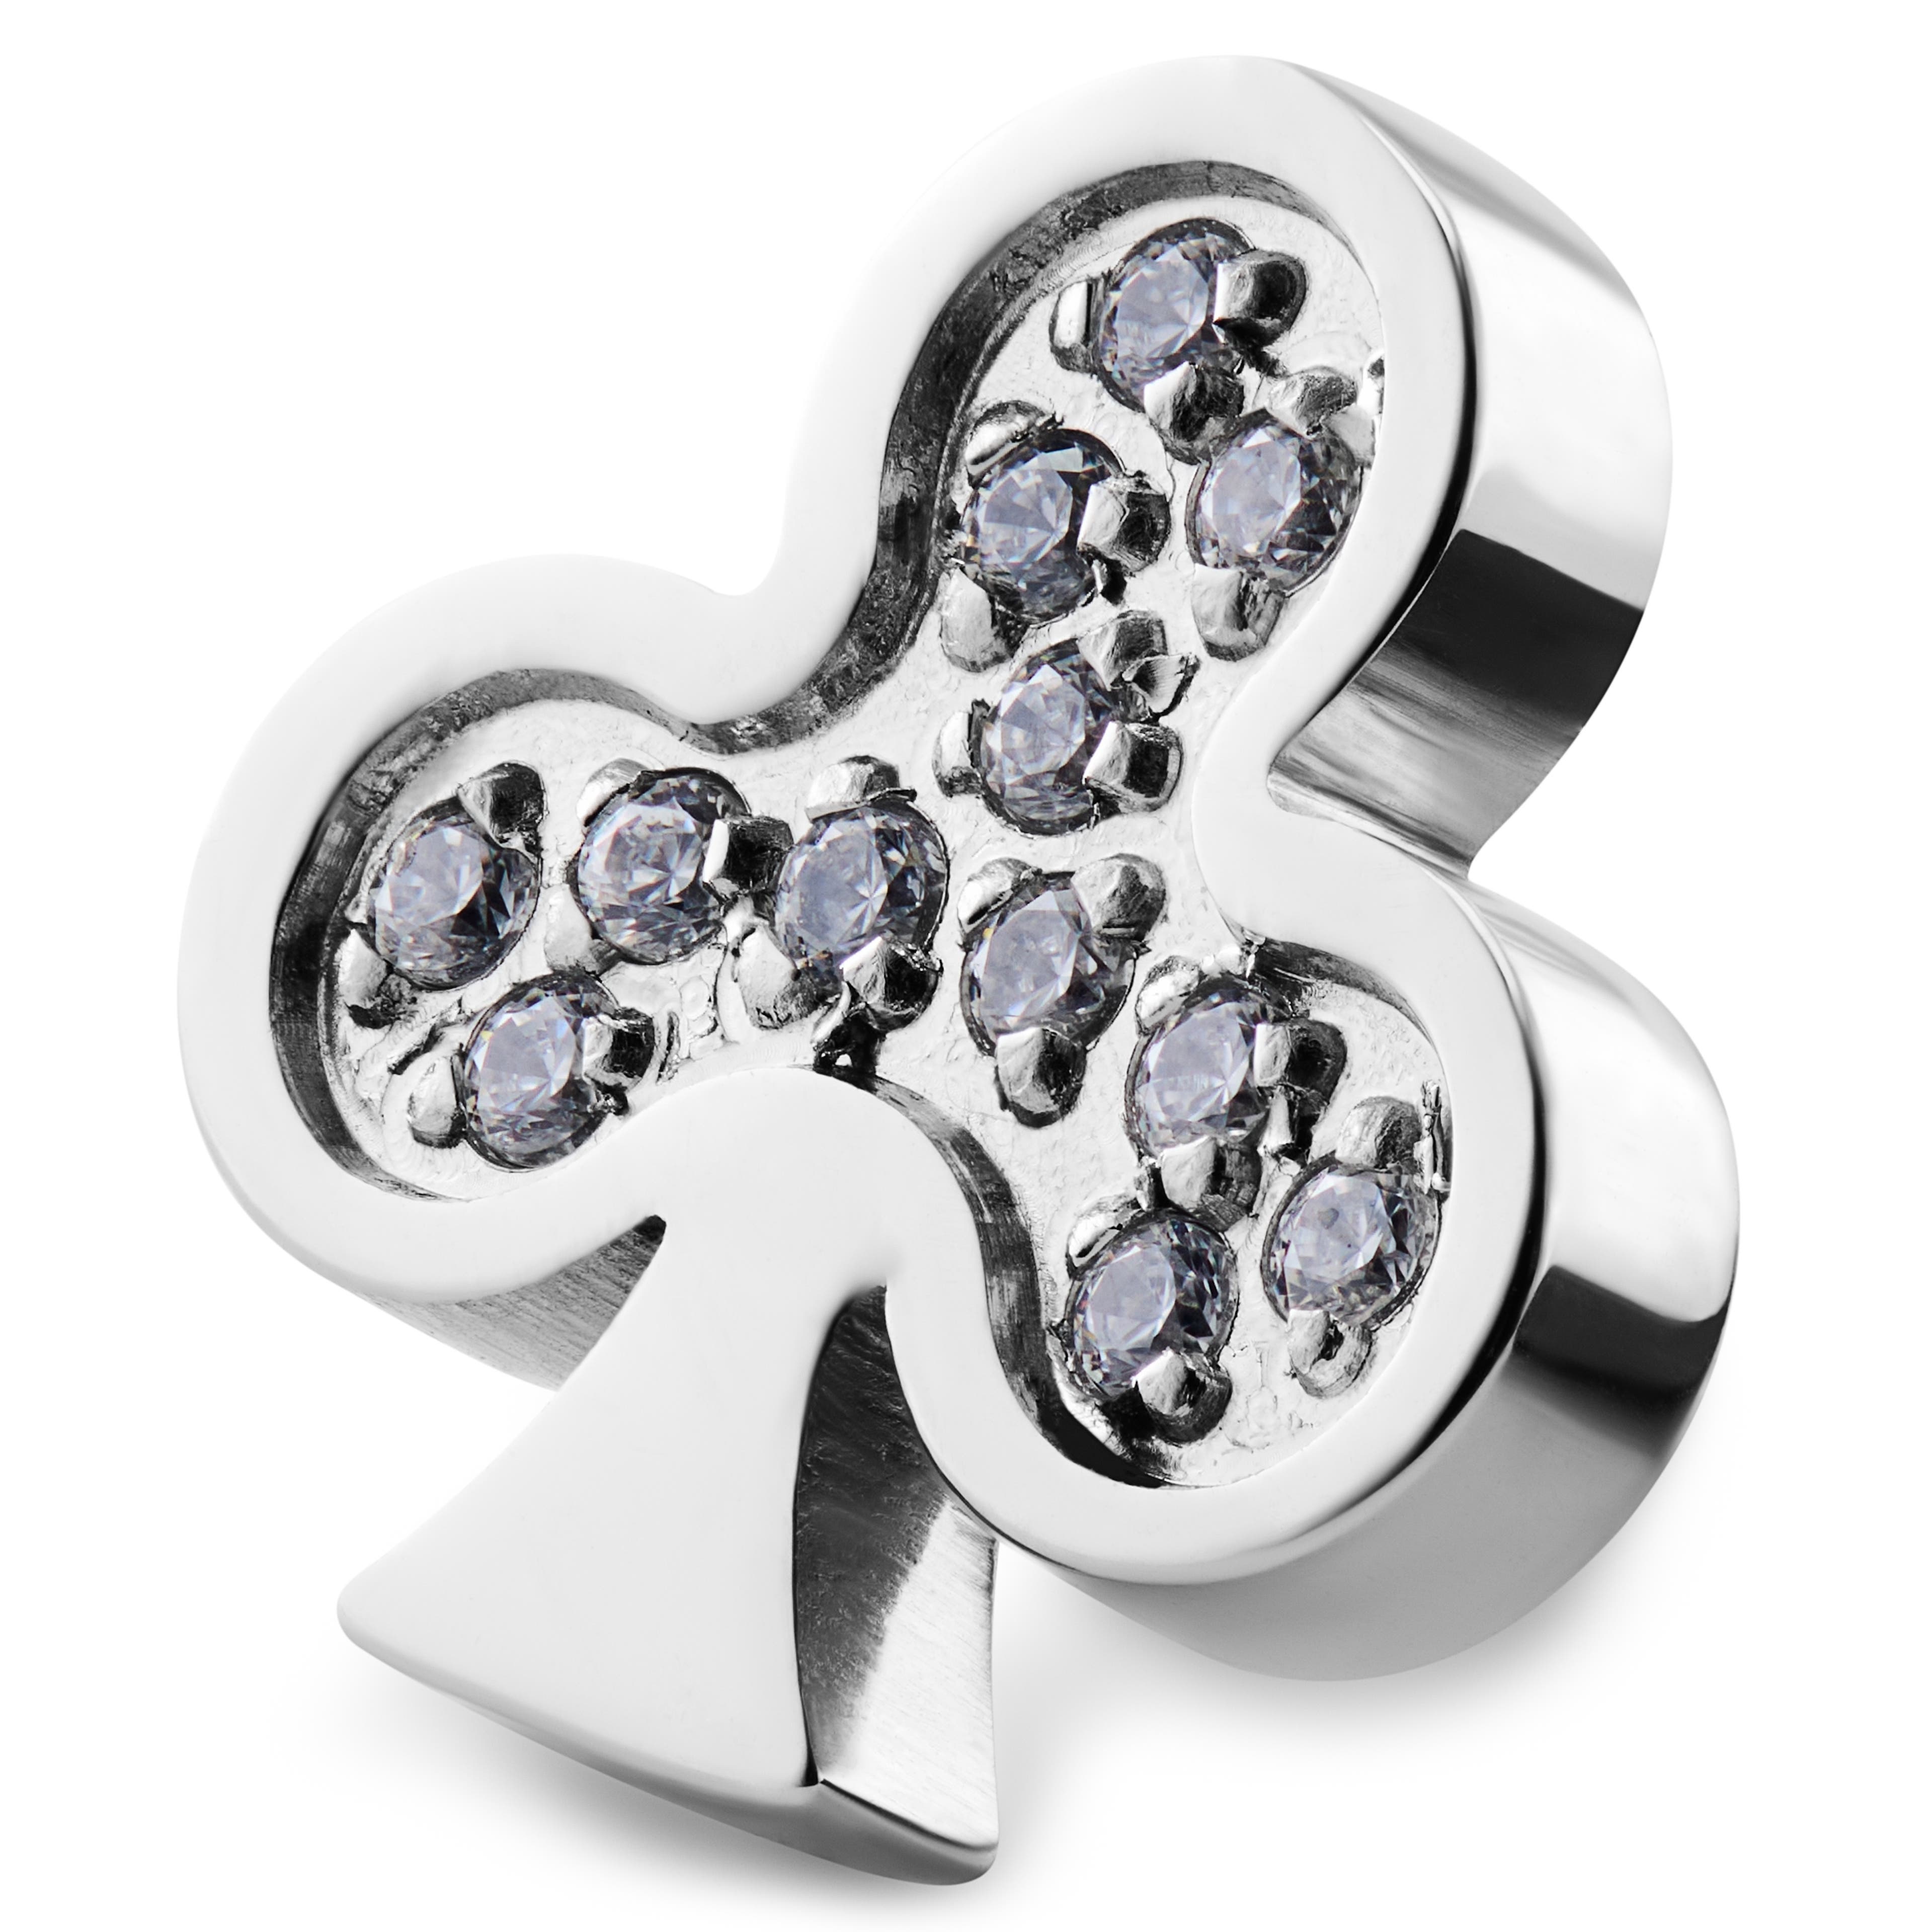 Silver-tone Stainless Steel and Zirconia Clubs Watch Charm